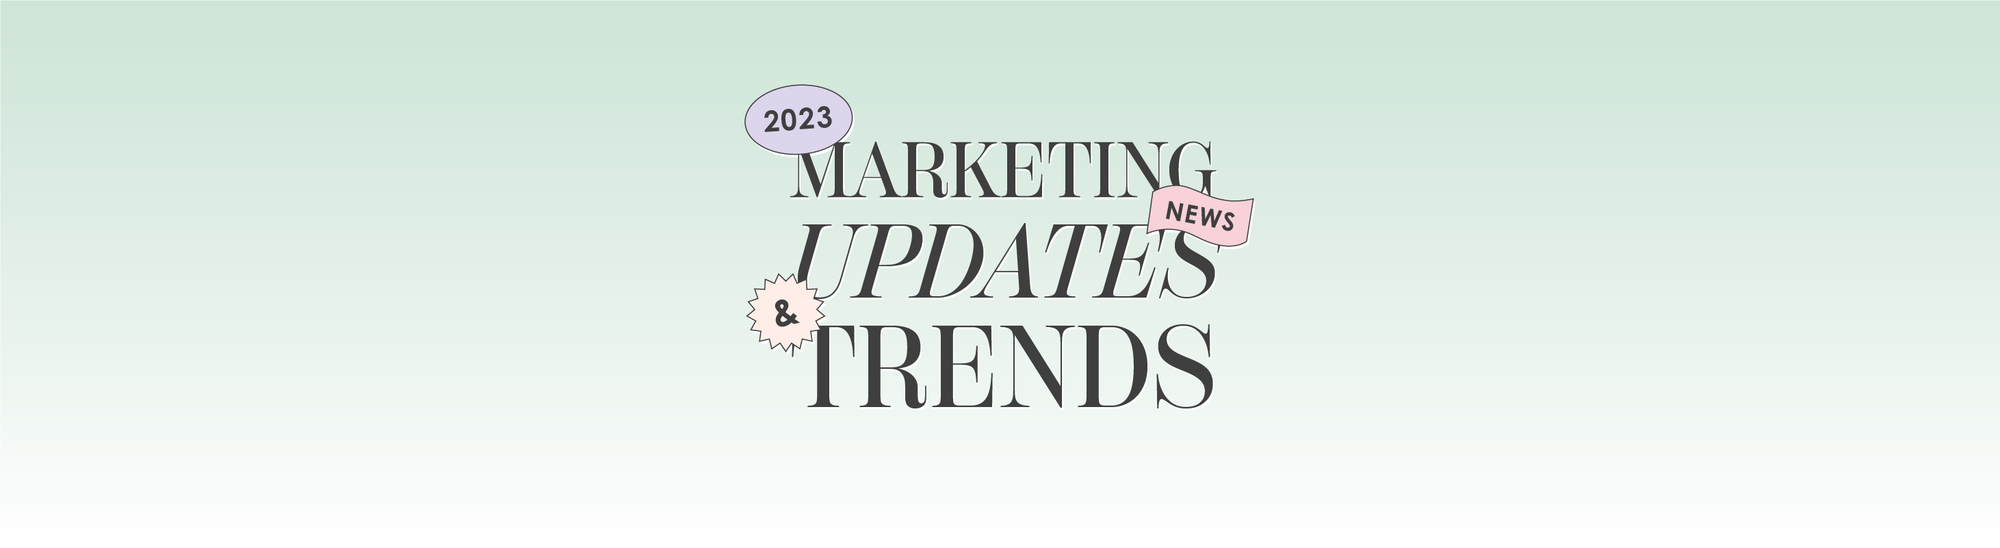 Prep for Quarter 4 with these Marketing News, Updates & Trends